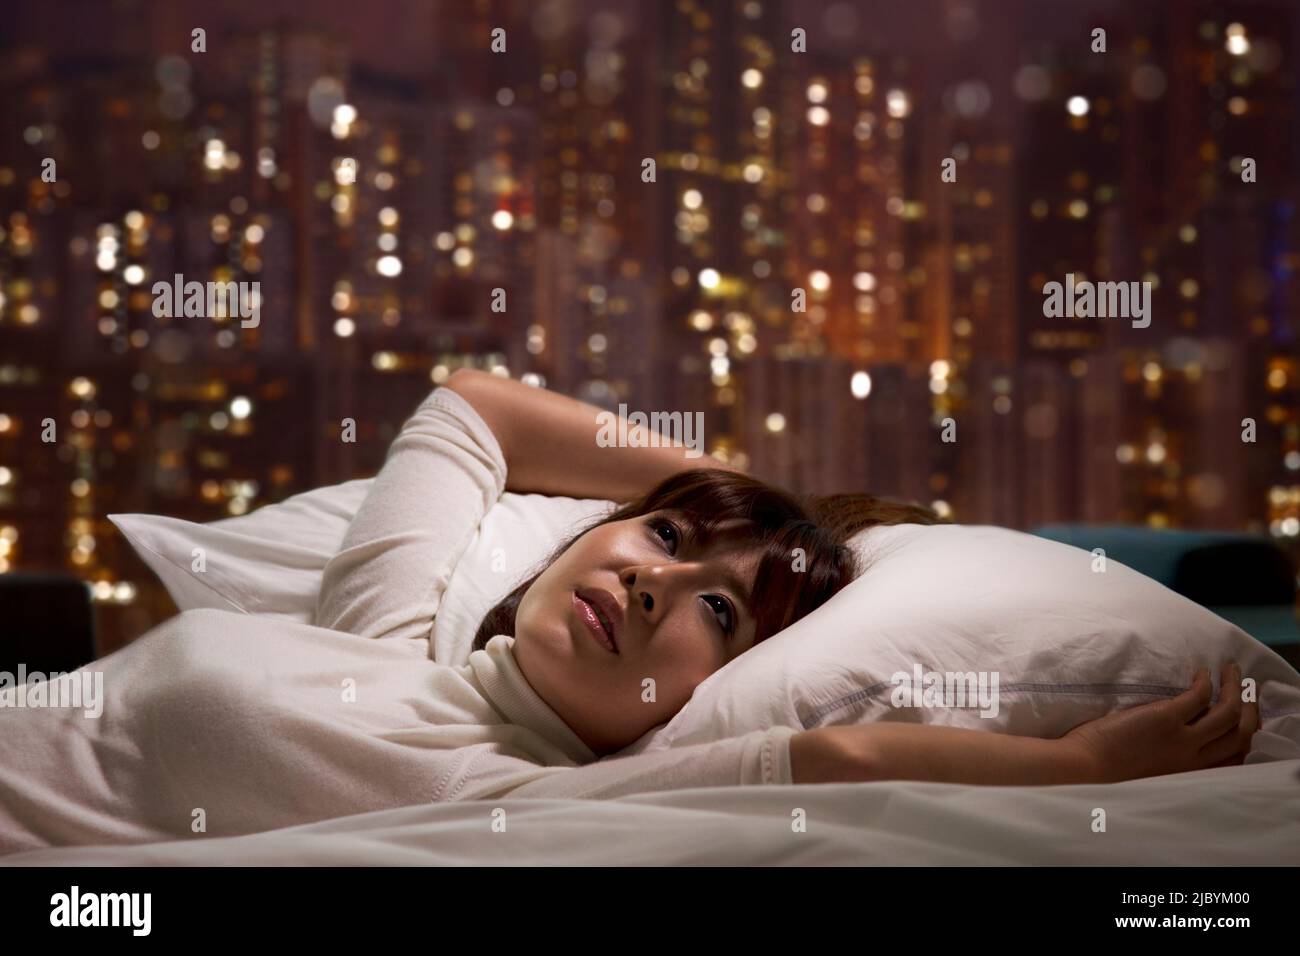 Woman laying on bed Stock Photo